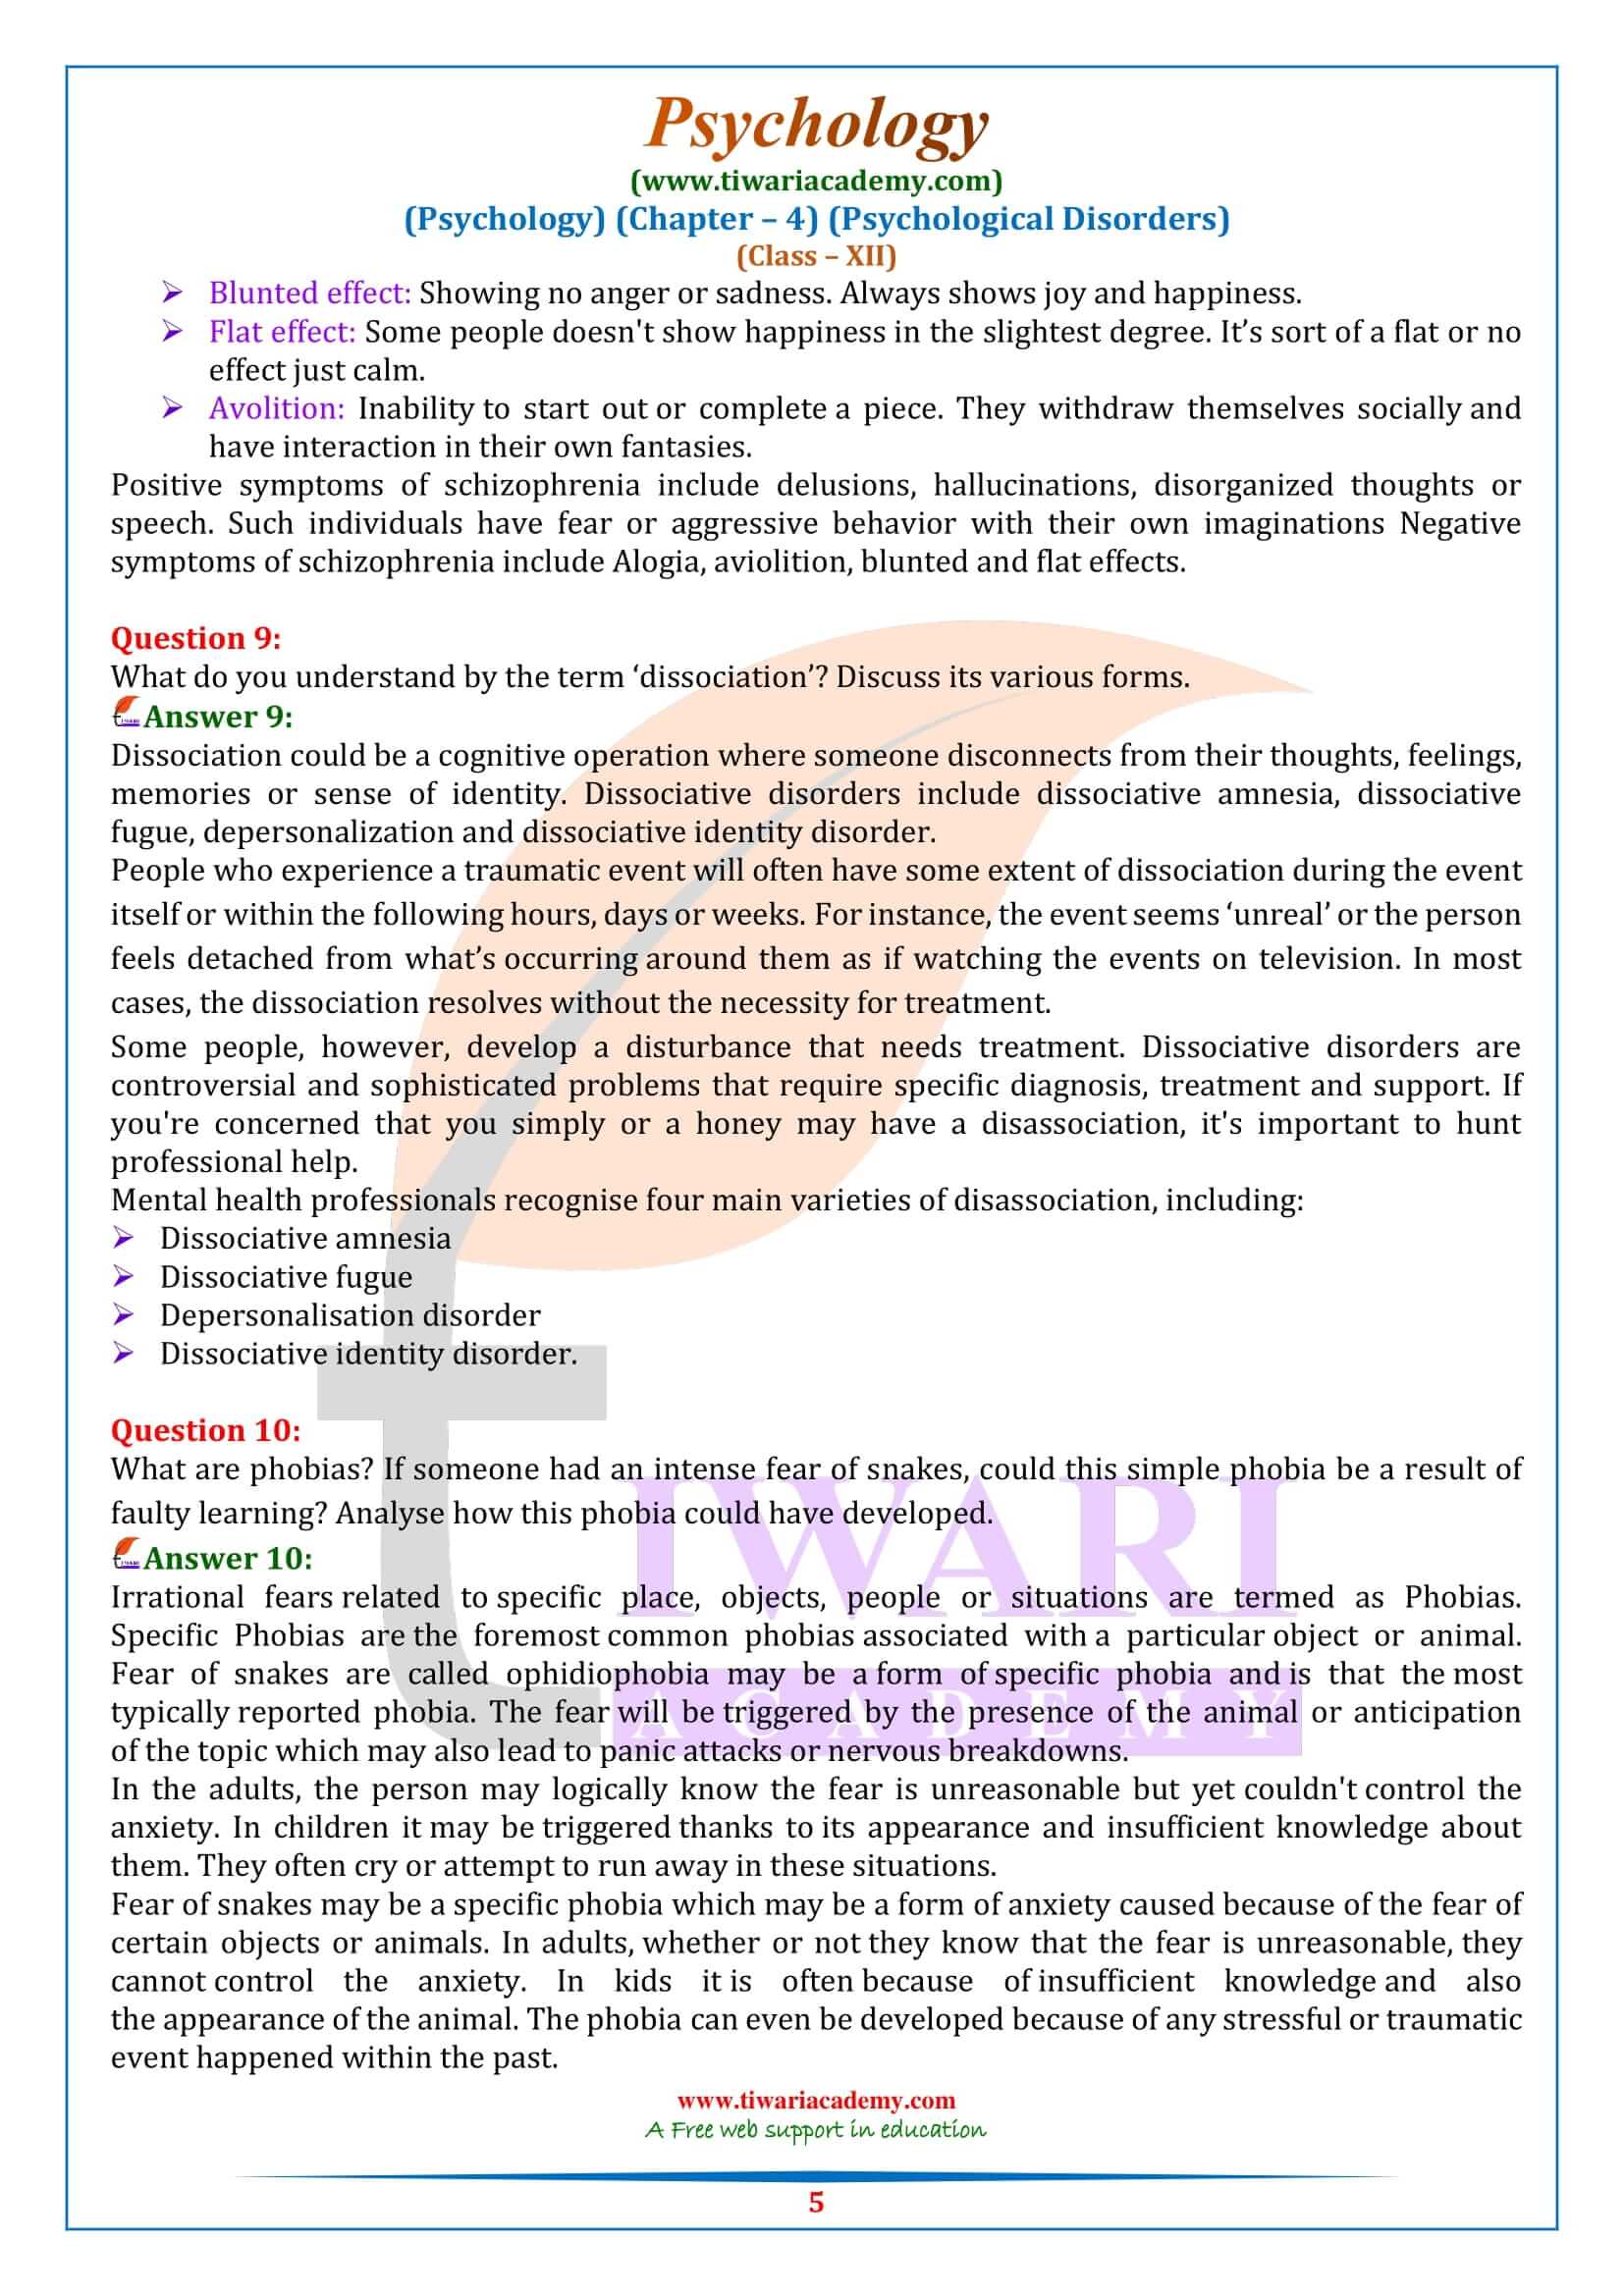 NCERT Solutions for Class 12 Psychology Chapter 4 guide